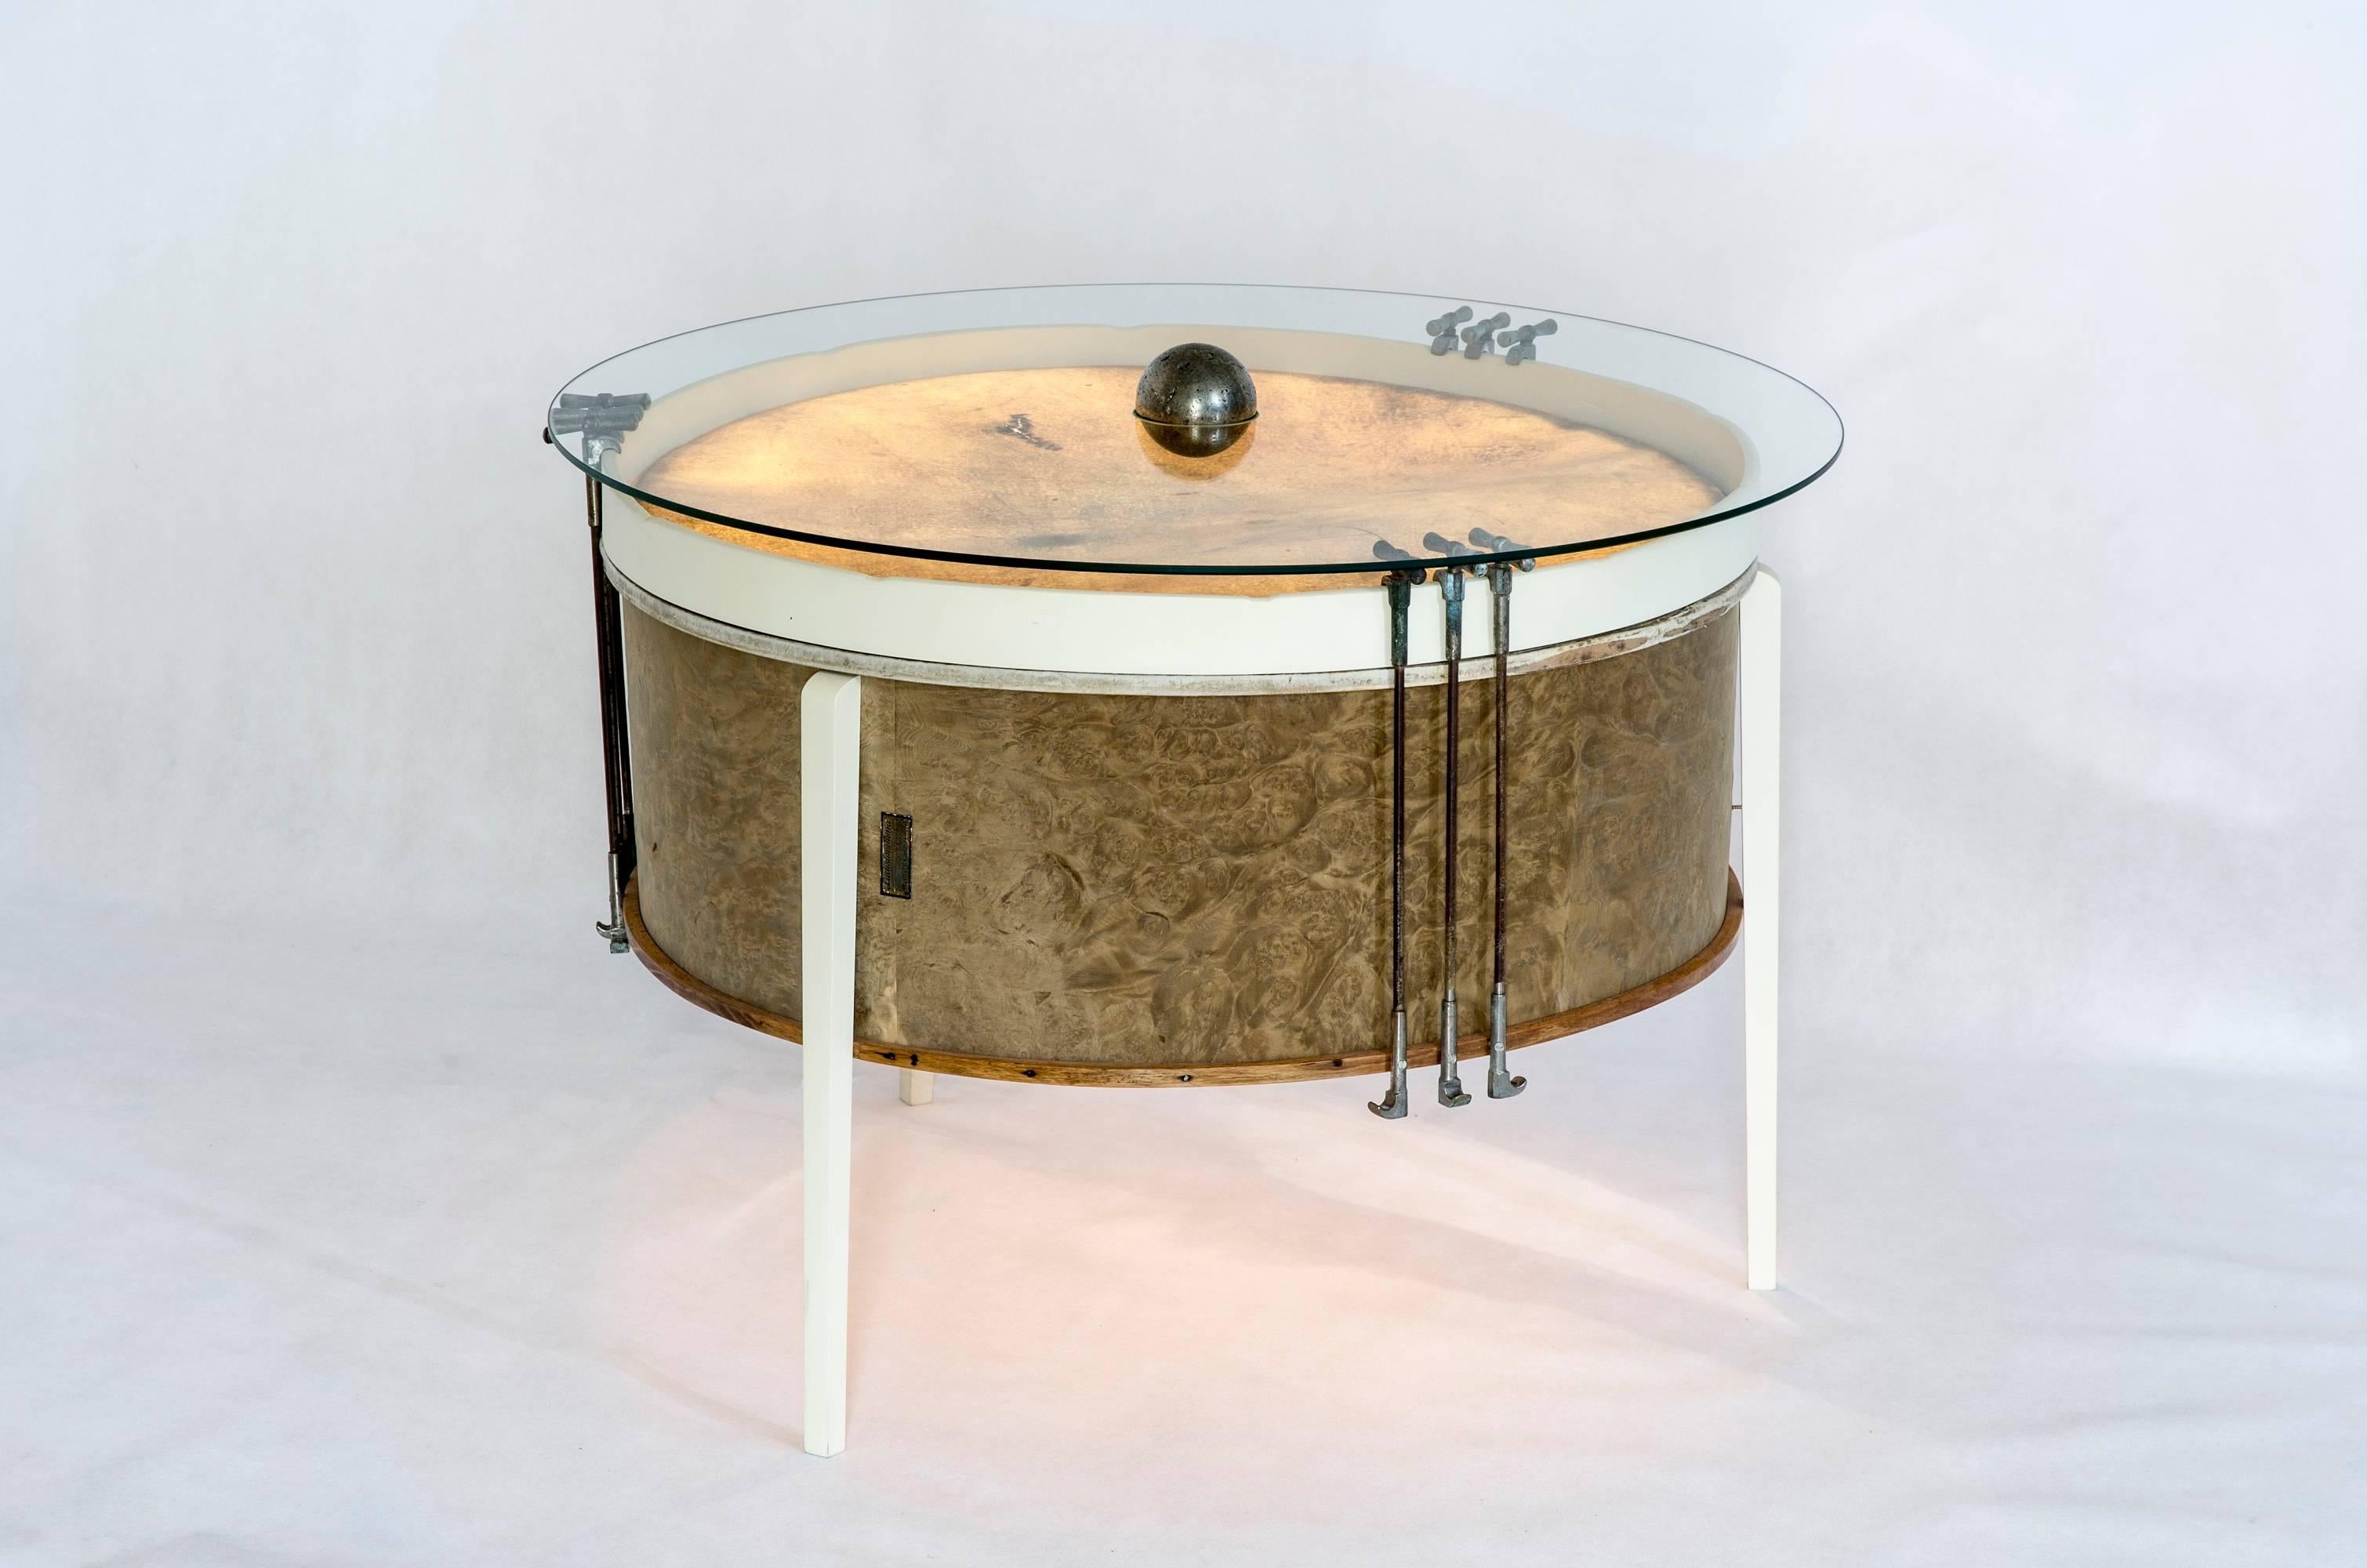 The body of this coffee table is formed by an approximately 100 year old drum. The pedal-drums include original leather membranes, back-lit in order to admire their leather texture as well as the traces of music they once made, the imprint of the